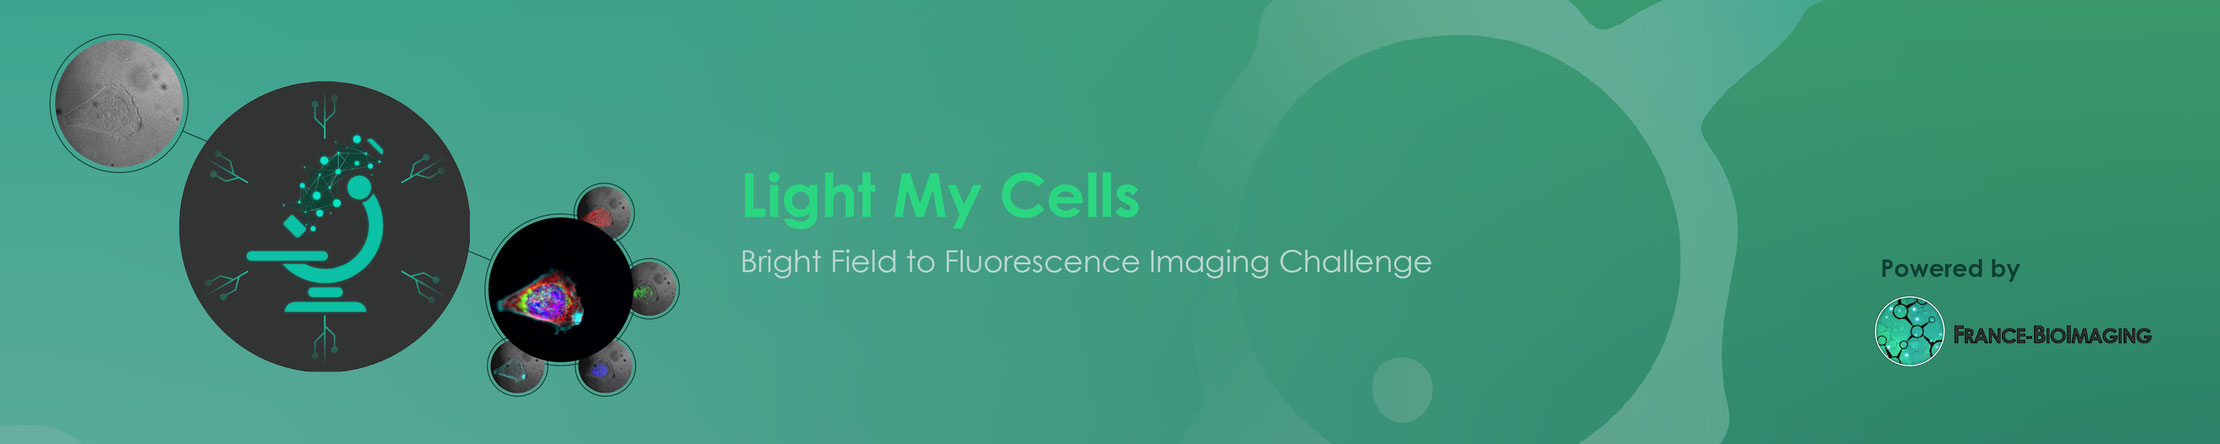 Light My Cells : Bright Field to Fluorescence Imaging Challenge Banner